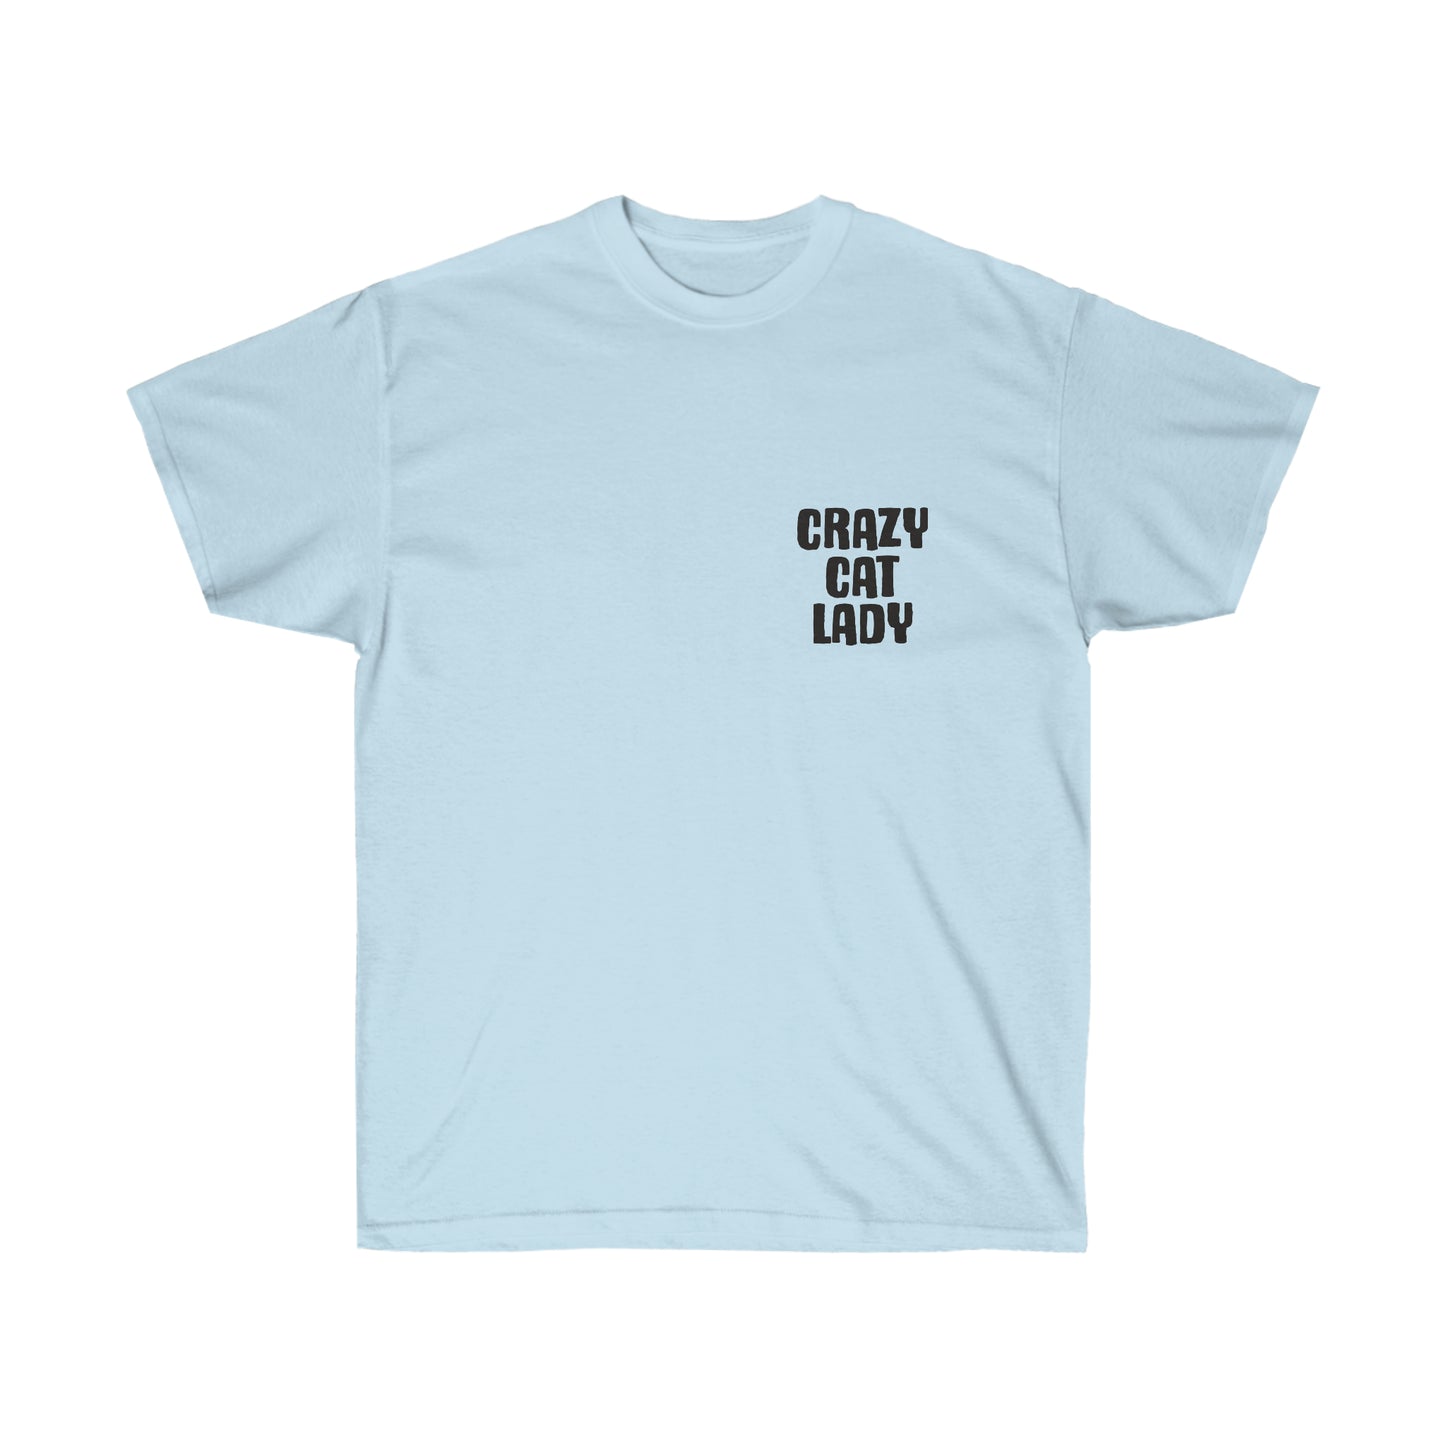 Crazy Cat Lady T-Shirt - Fun and Playful Tee for Feline Enthusiasts - Gift for Cat Lovers Unisex